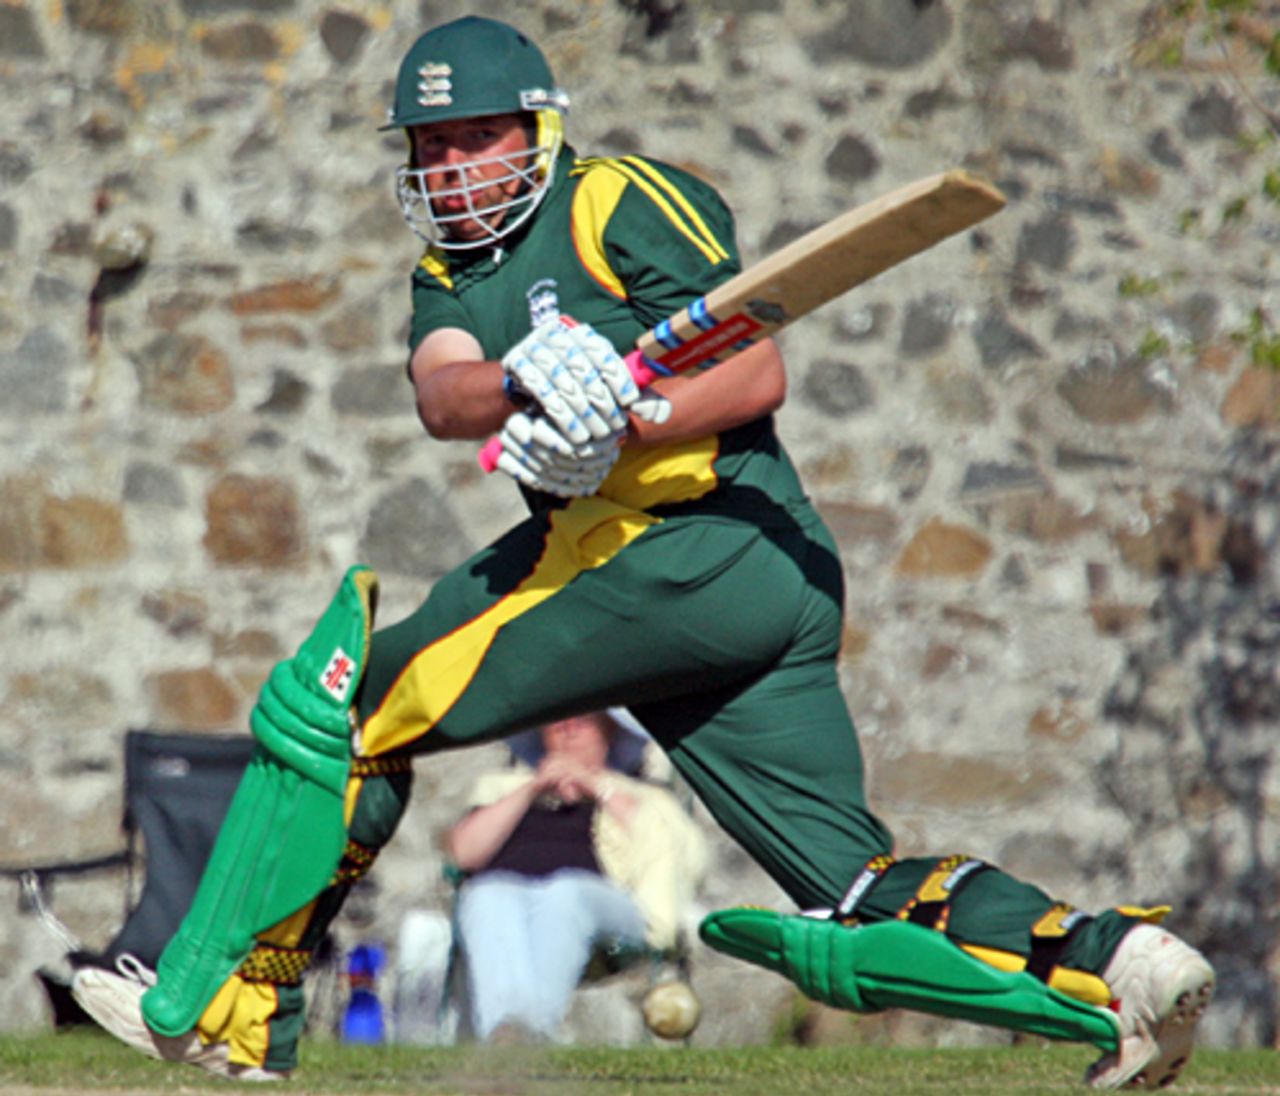 Stuart Le Prevost sweeps en route to his half-century, Guernsey v Nigeria, ICC World Cricket League Division 7, St Peter Port, May 21, 2009